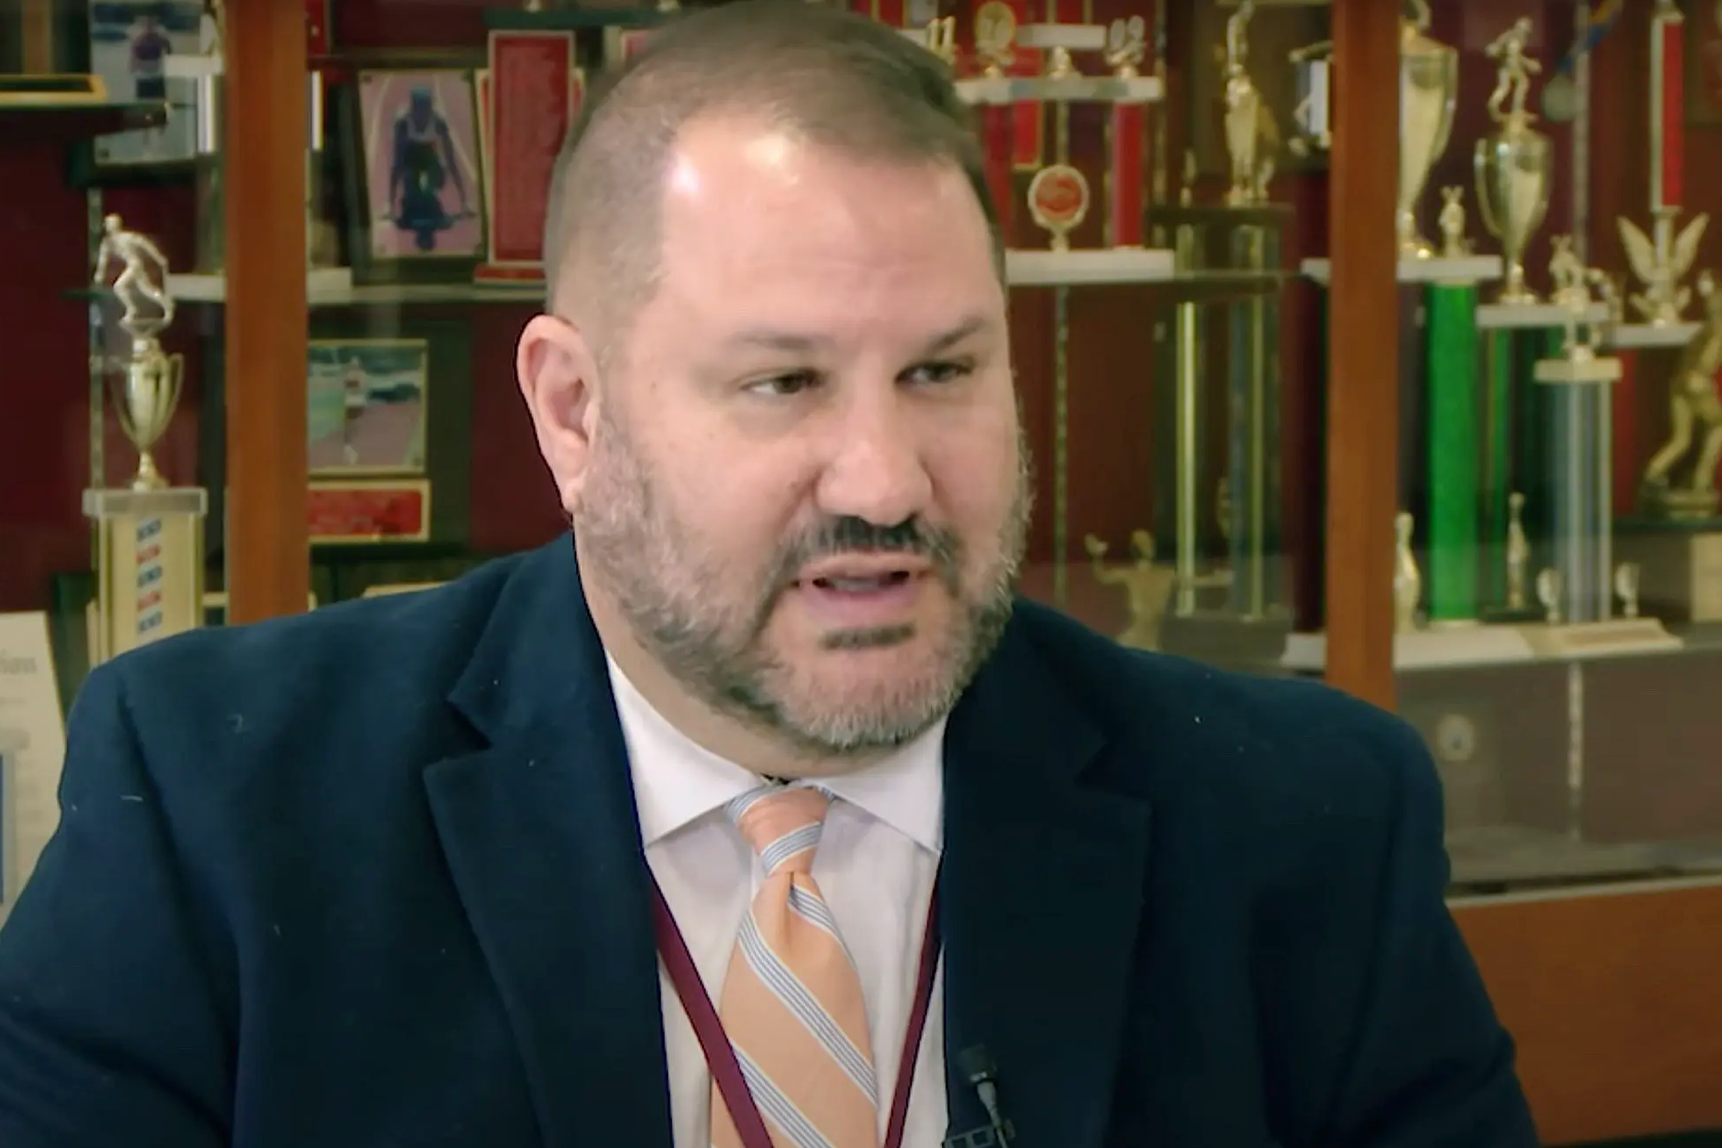 New Jersey school superintendent Triantafillos Parlapanides has resigned after an emergency meeting was held to discuss media statements he made about Adriana Kuch